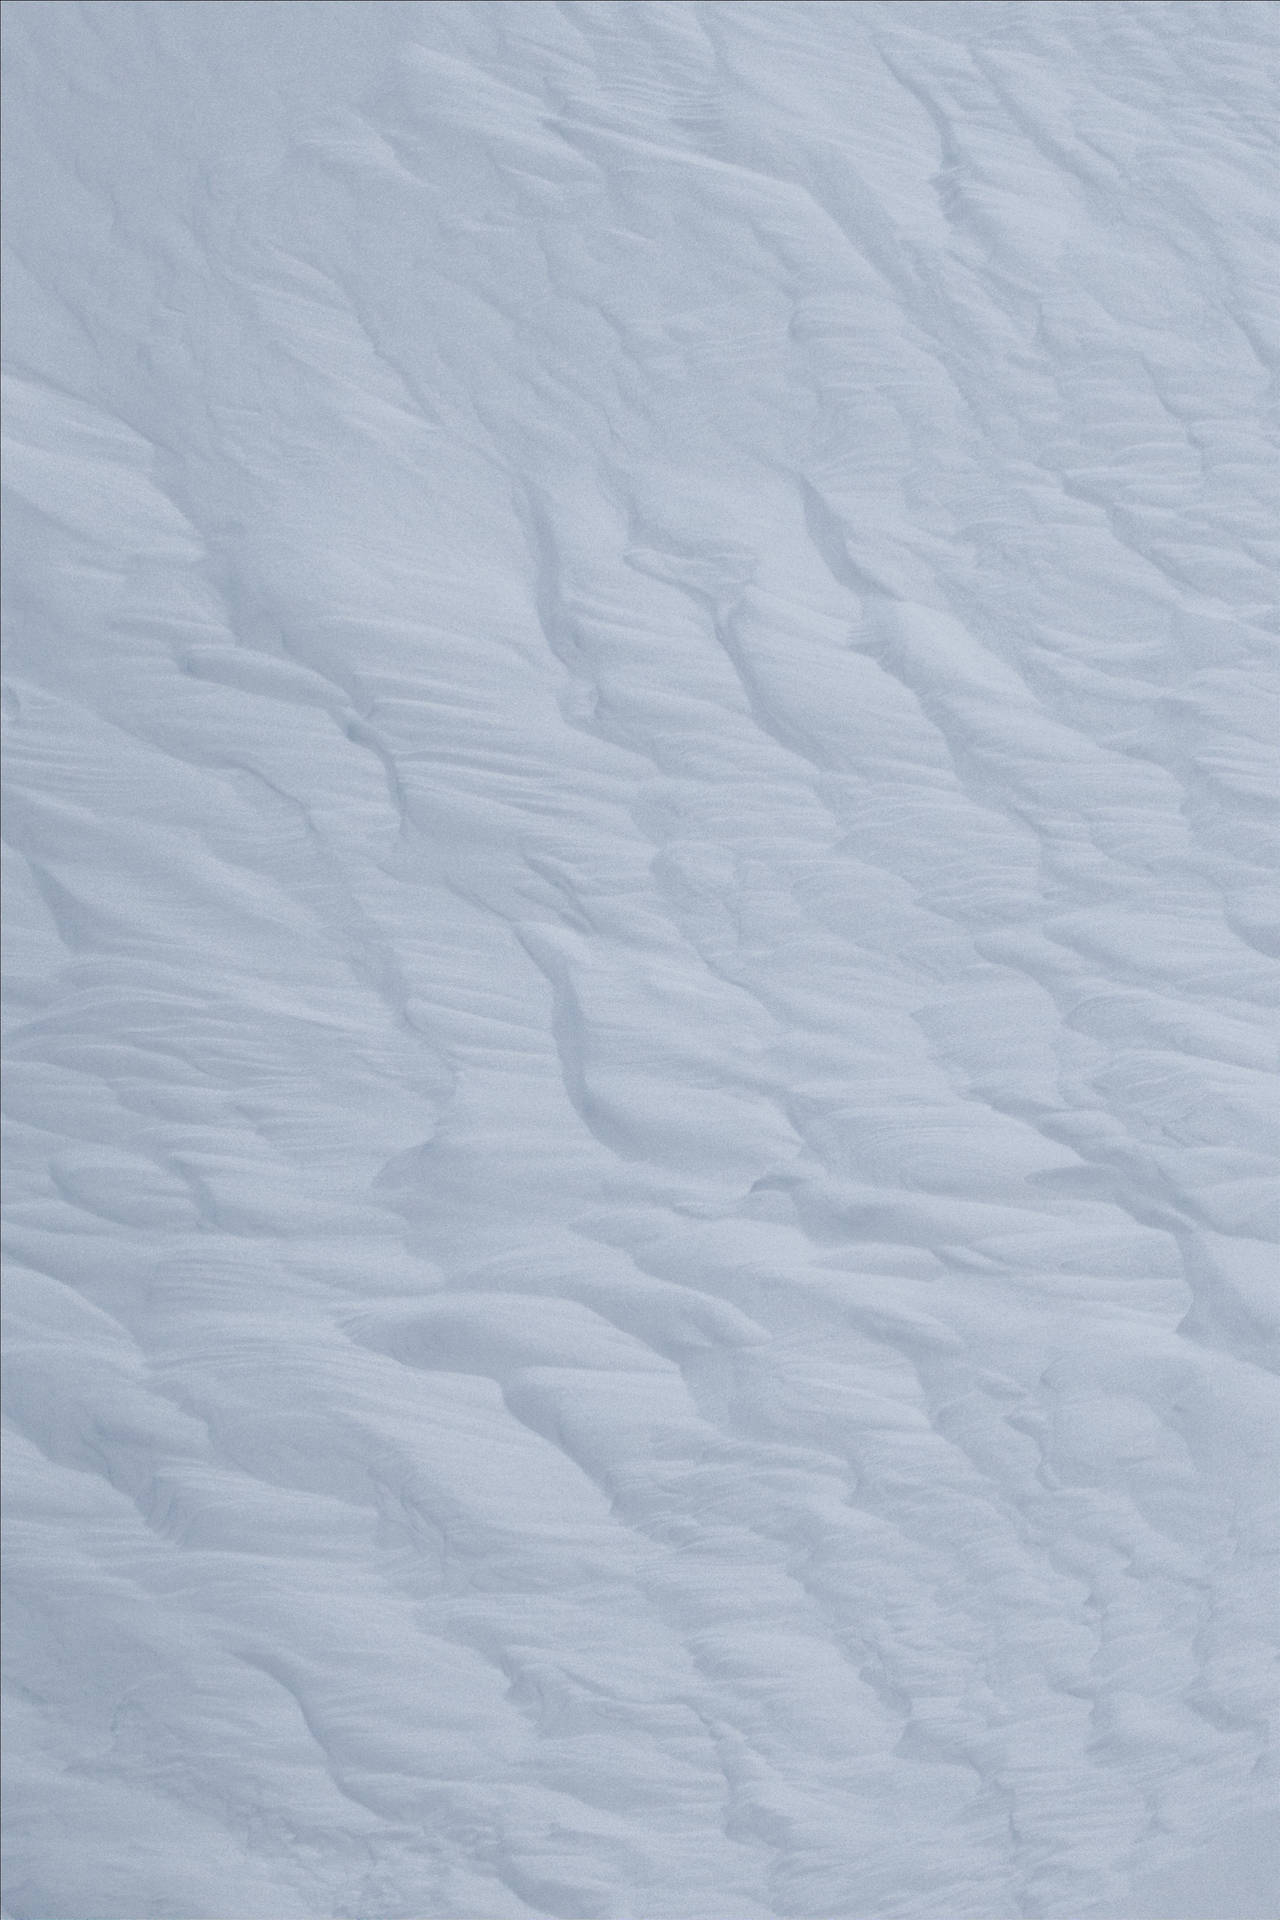 Snow Relief Texture with White and Gray Wallpaper